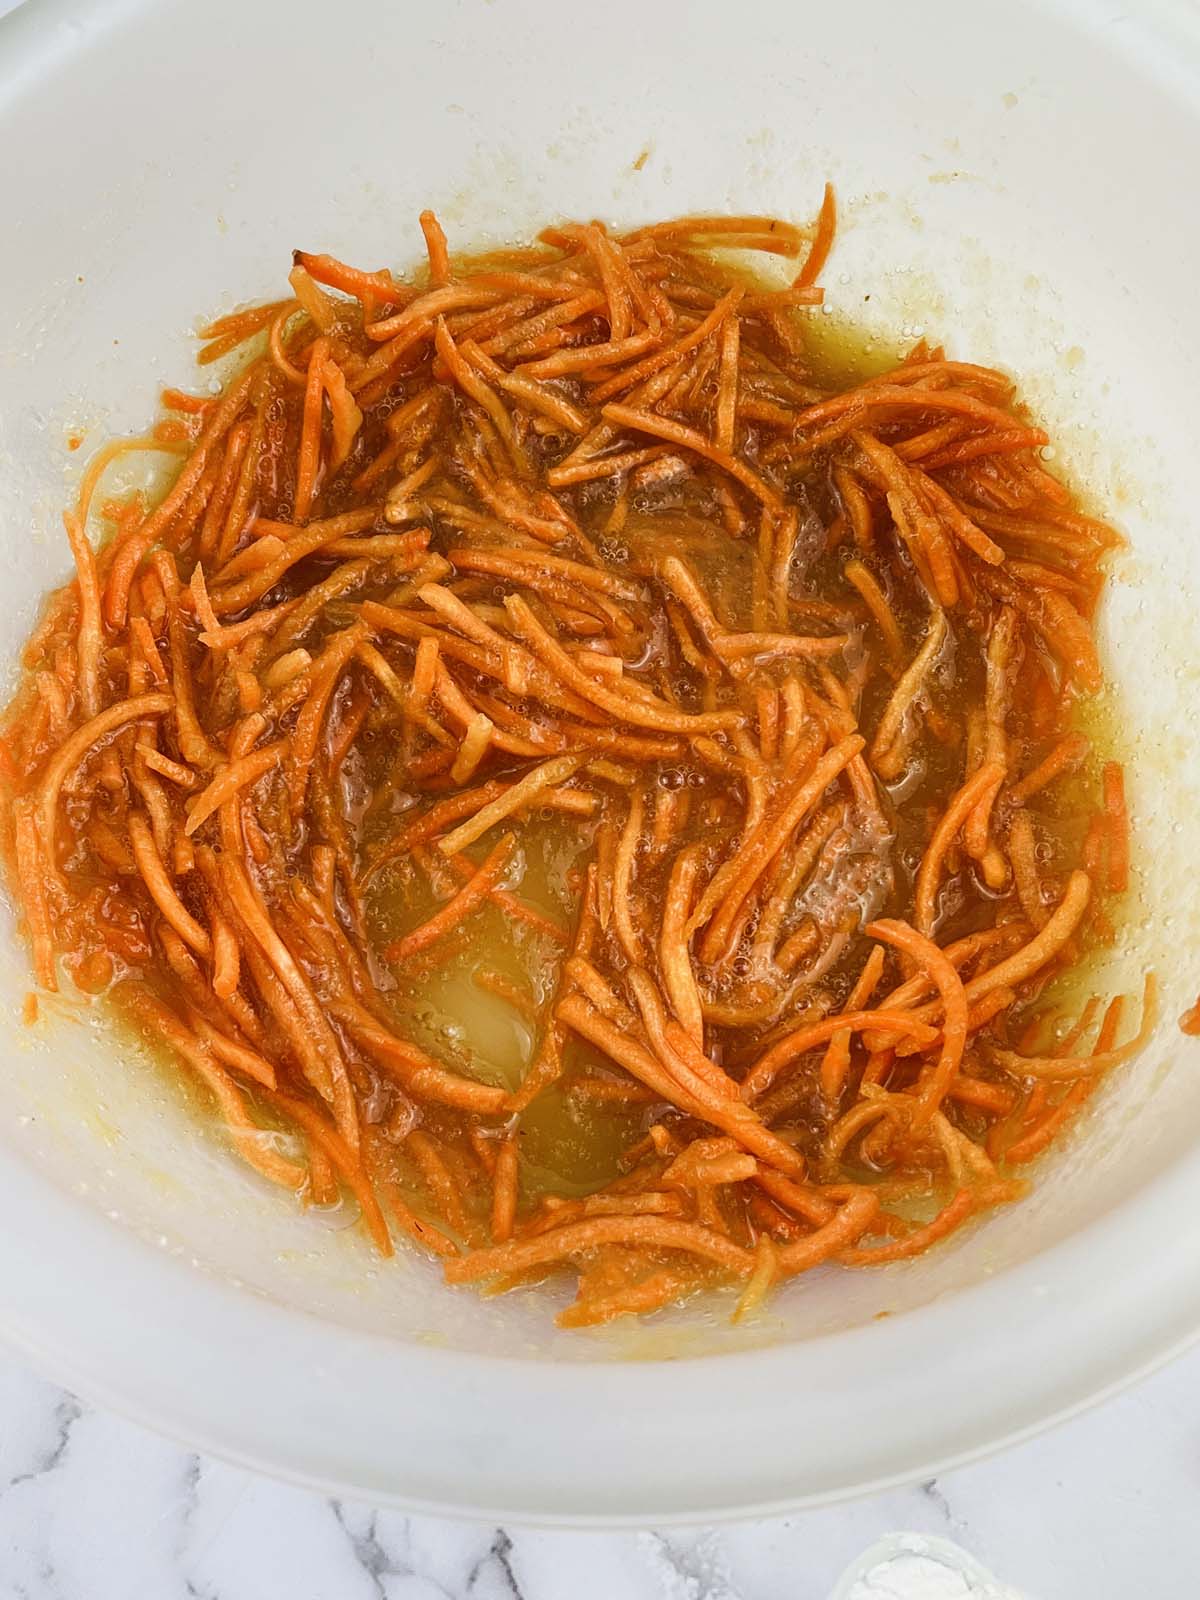 Shredded carrots and applesauce mixed together.